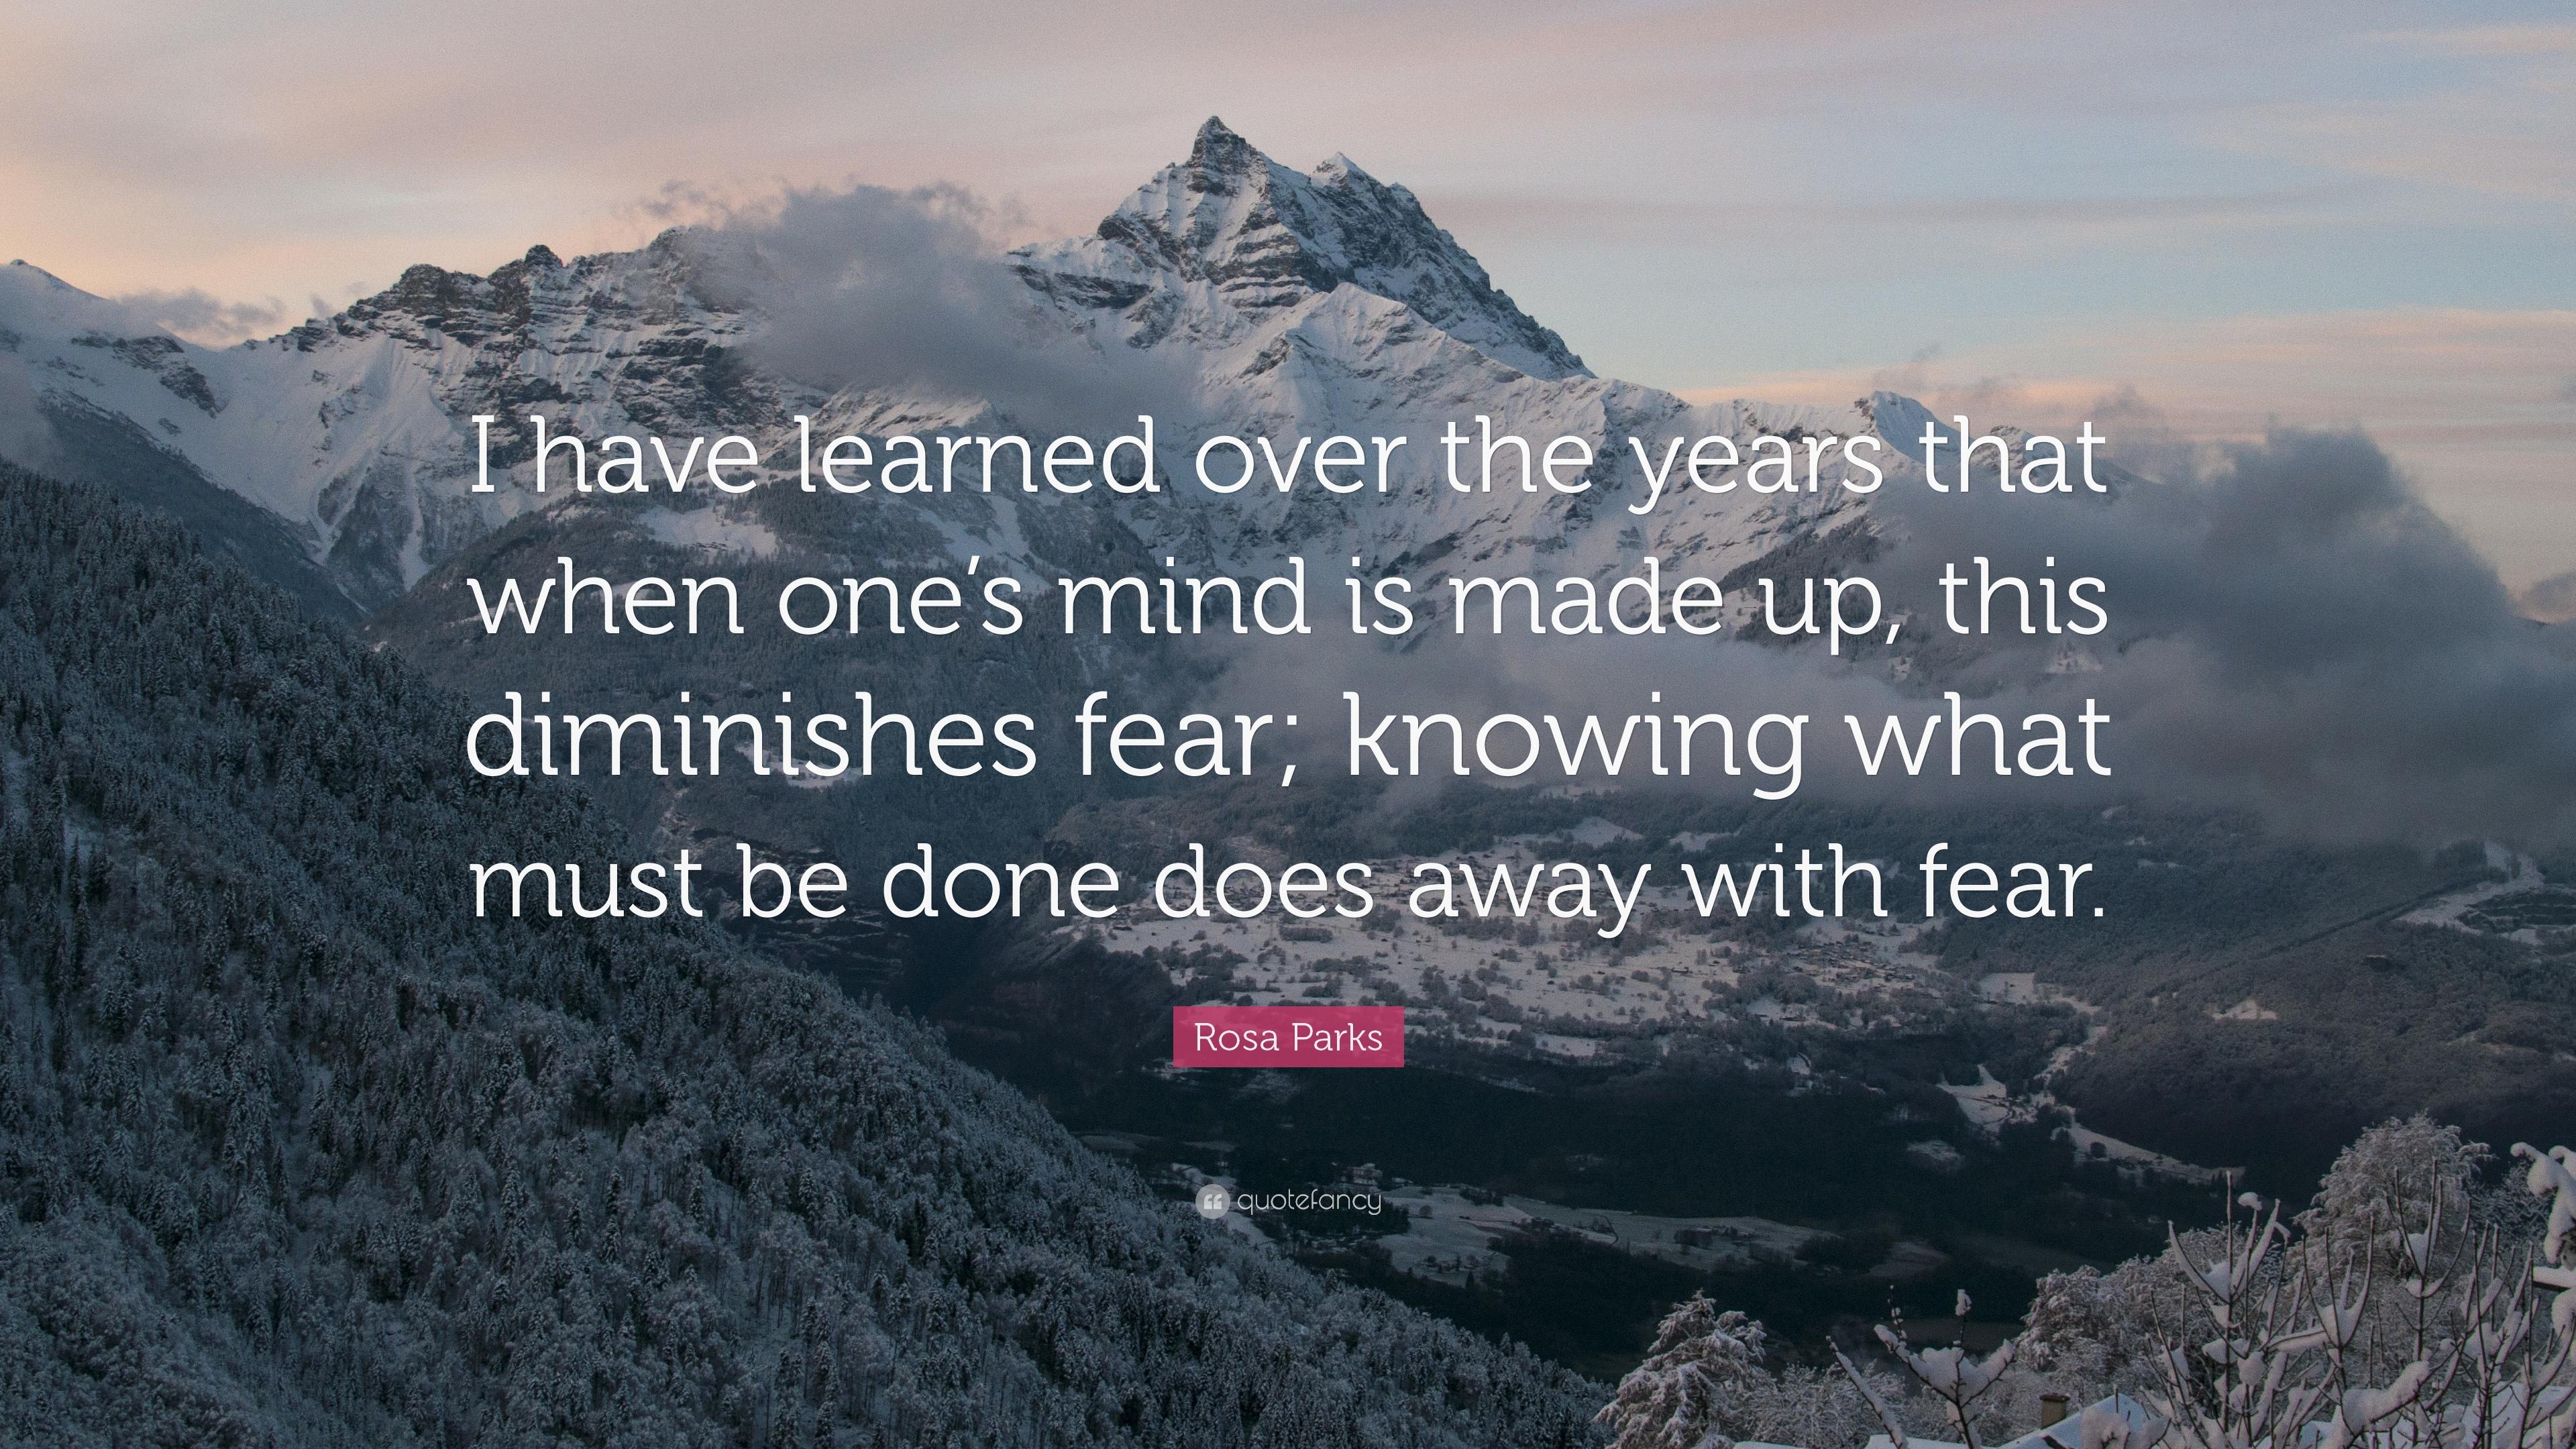 Rosa Parks Quote: “I have learned over the years that when one's